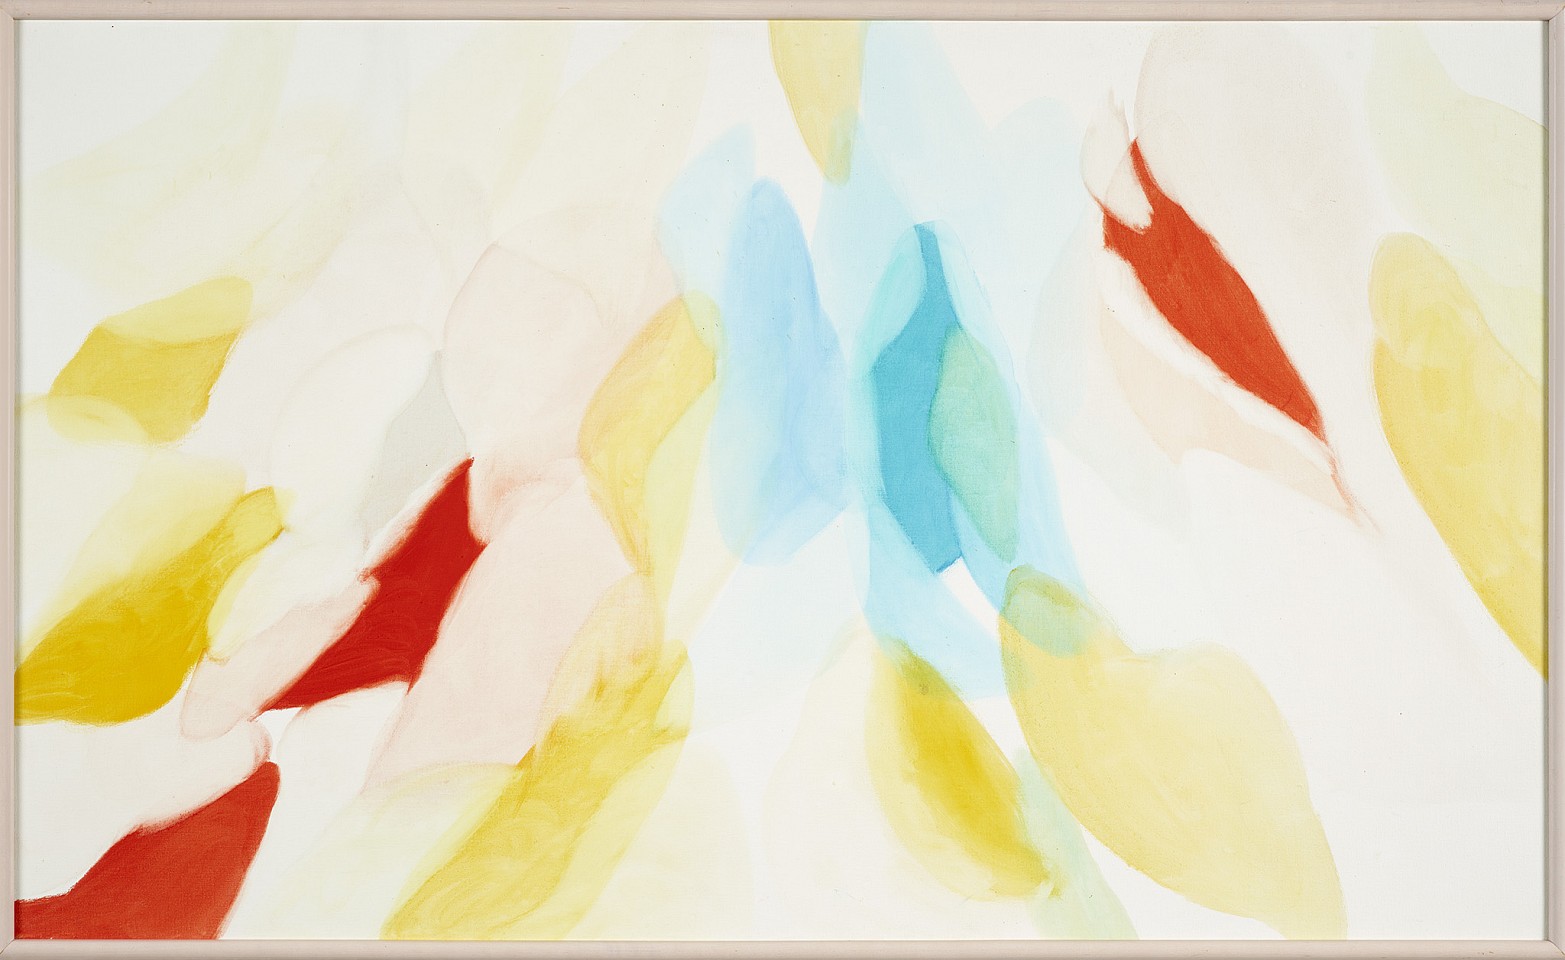 Alice Baber, Red Song of the Ladder, 1976
Oil on canvas, 30 x 50 in. (76.2 x 127 cm)
BAB-00044